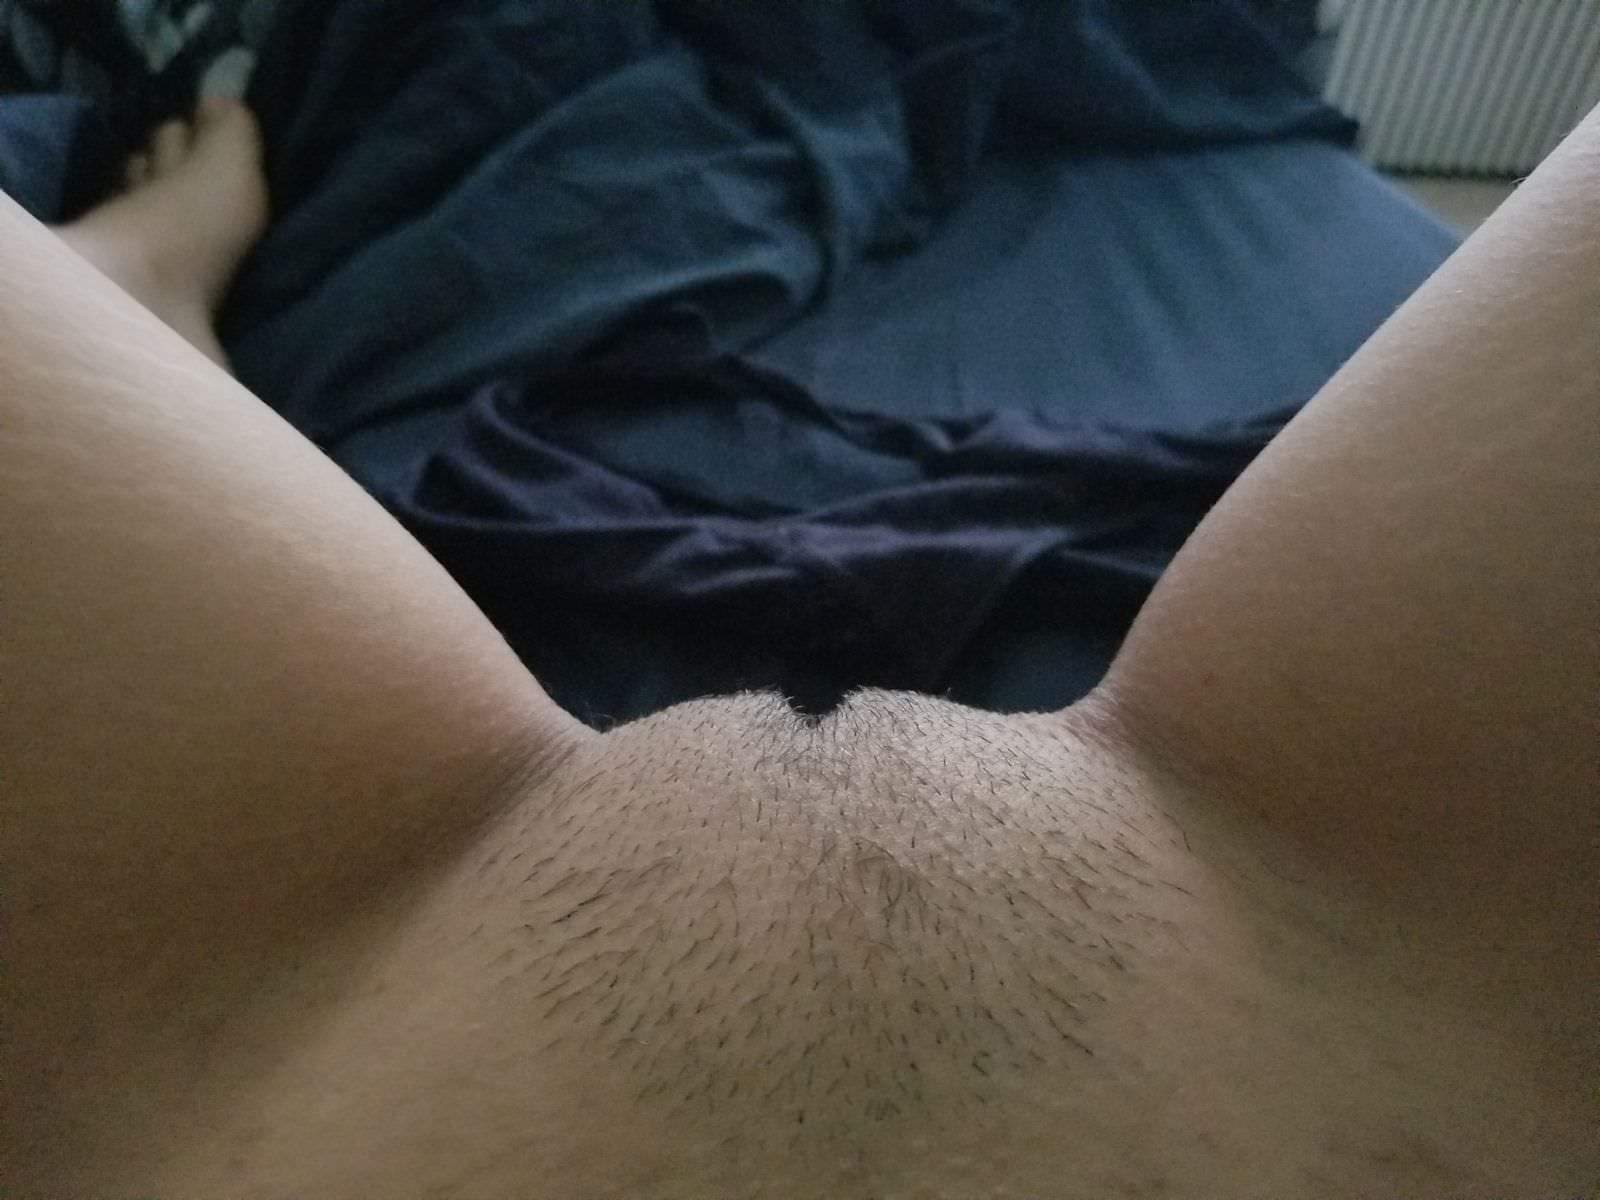 My wife just trimmed her pussy